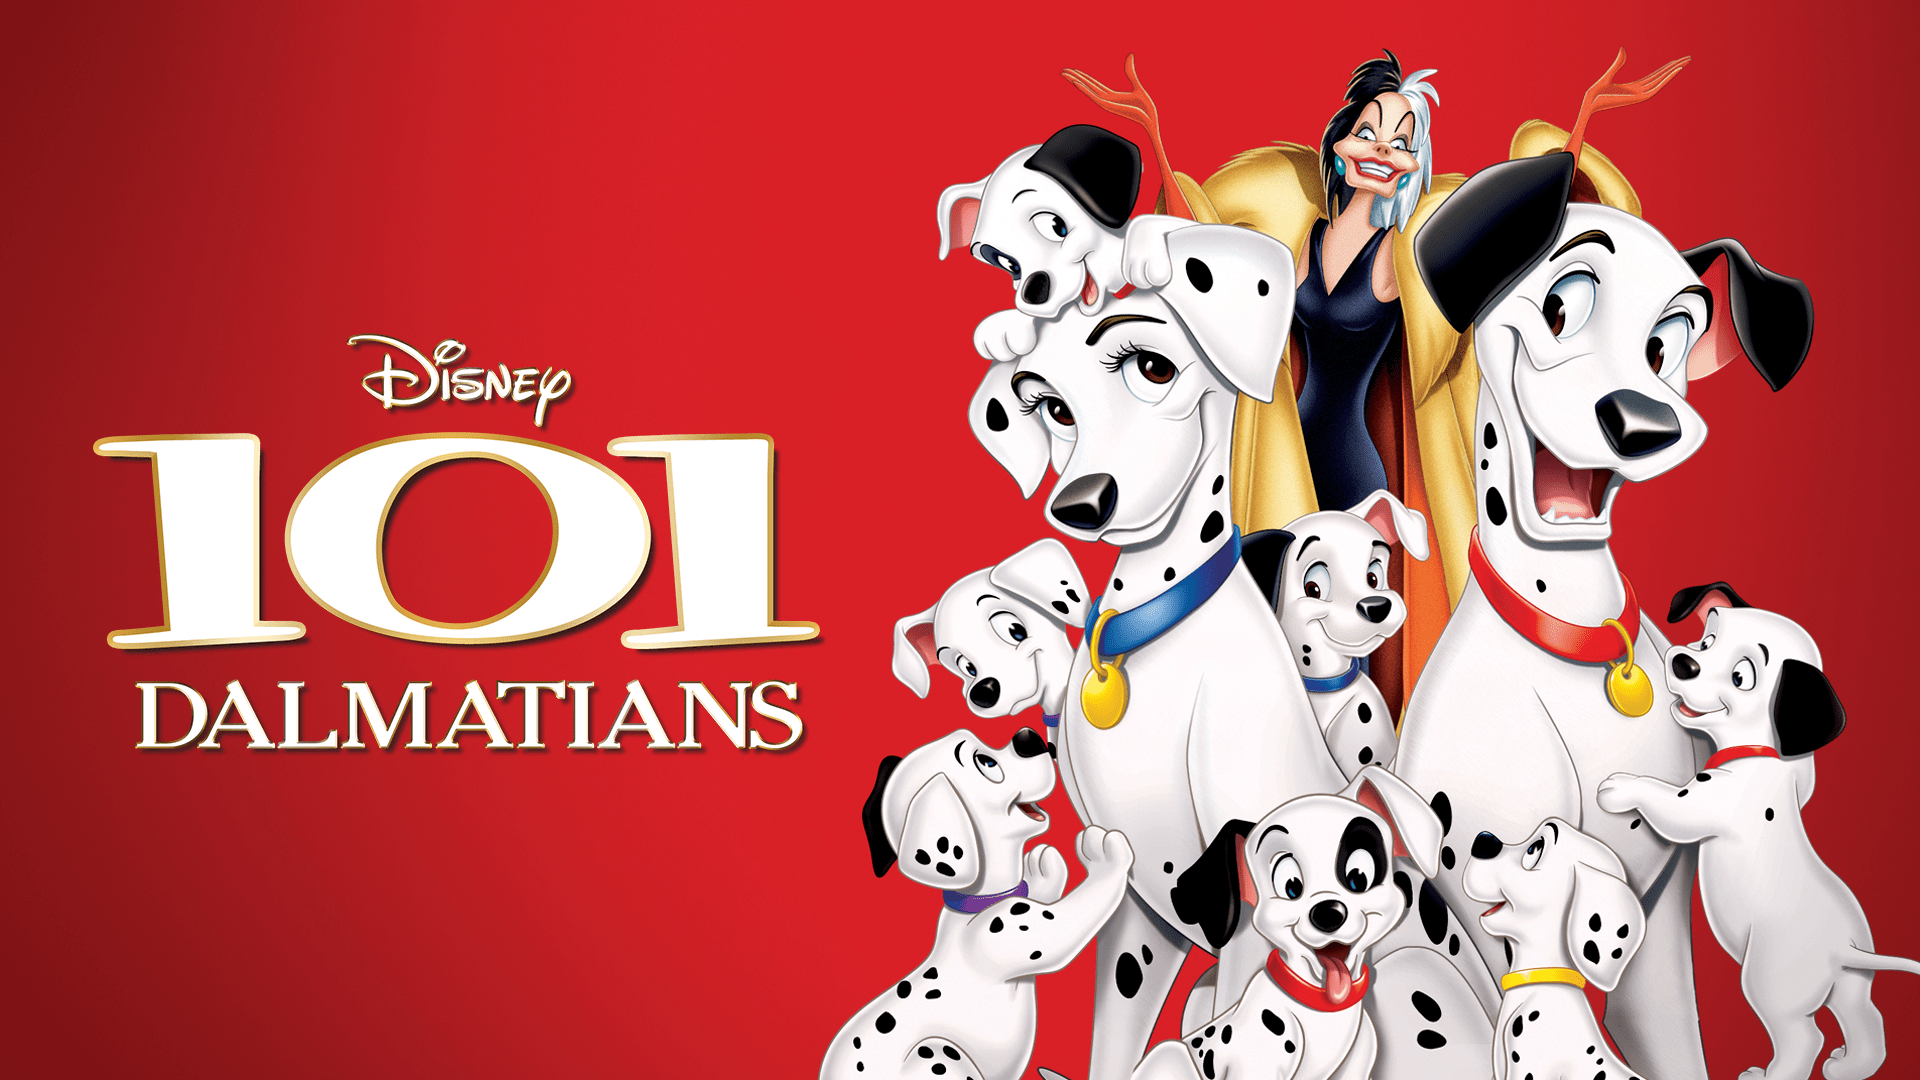 One Hundred and One Dalmatians - Wikipedia